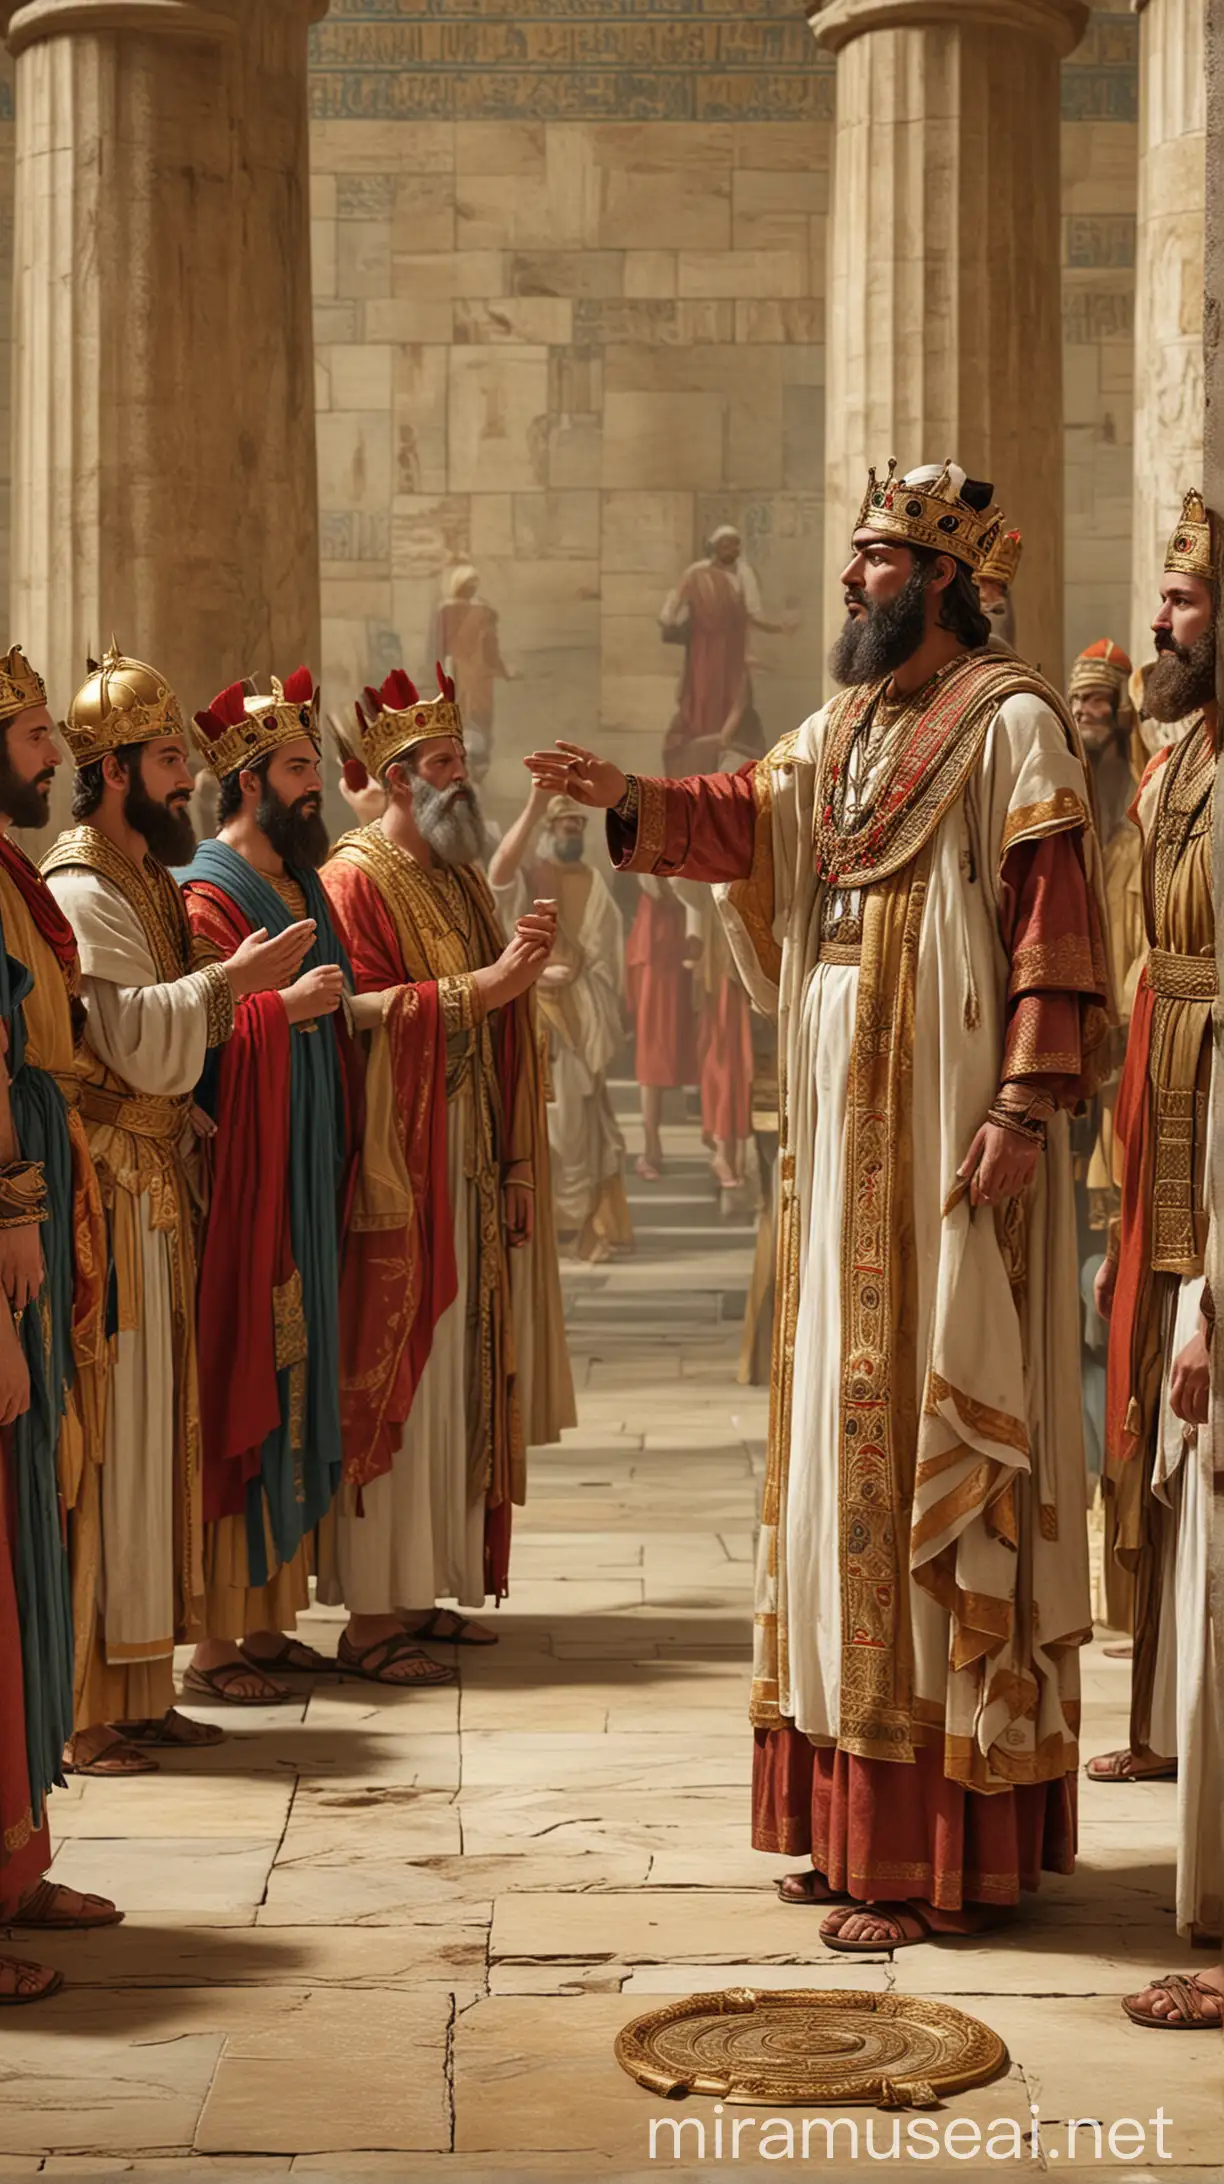 Visualize Cononiah standing before King Hezekiah, receiving the royal decree to oversee the temple offerings.In ancient world 